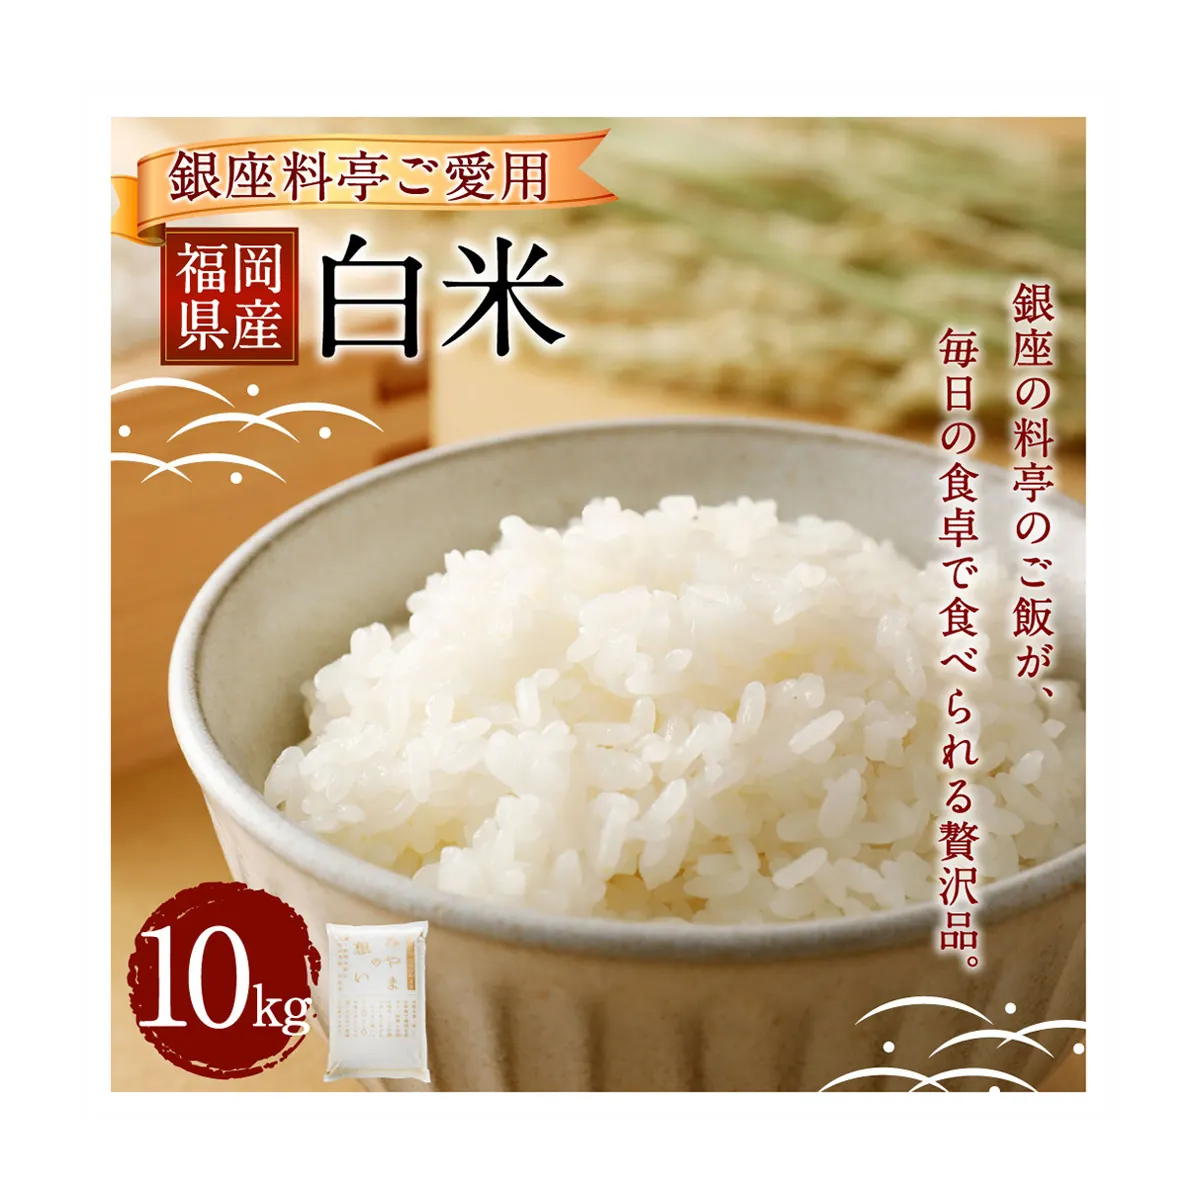 Food Supplier Japanese Rice Meal Jasmine Rice Long Grain White Japan Meal For Sale